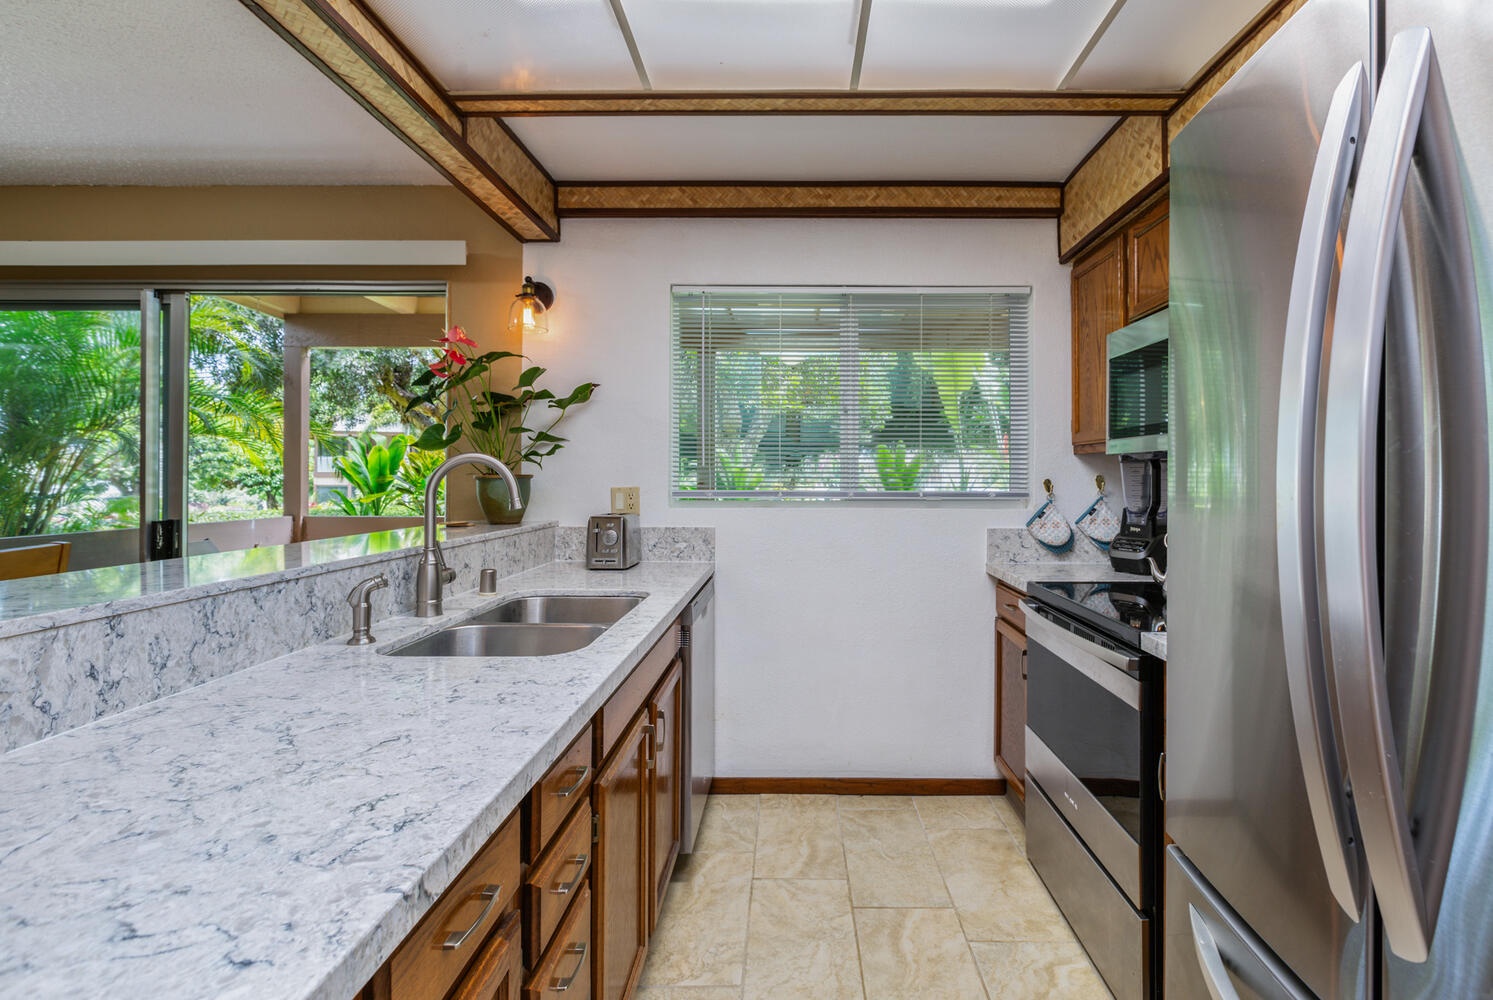 Princeville Vacation Rentals, Hideaway Haven - A roomy kitchen space is a chef's delight.